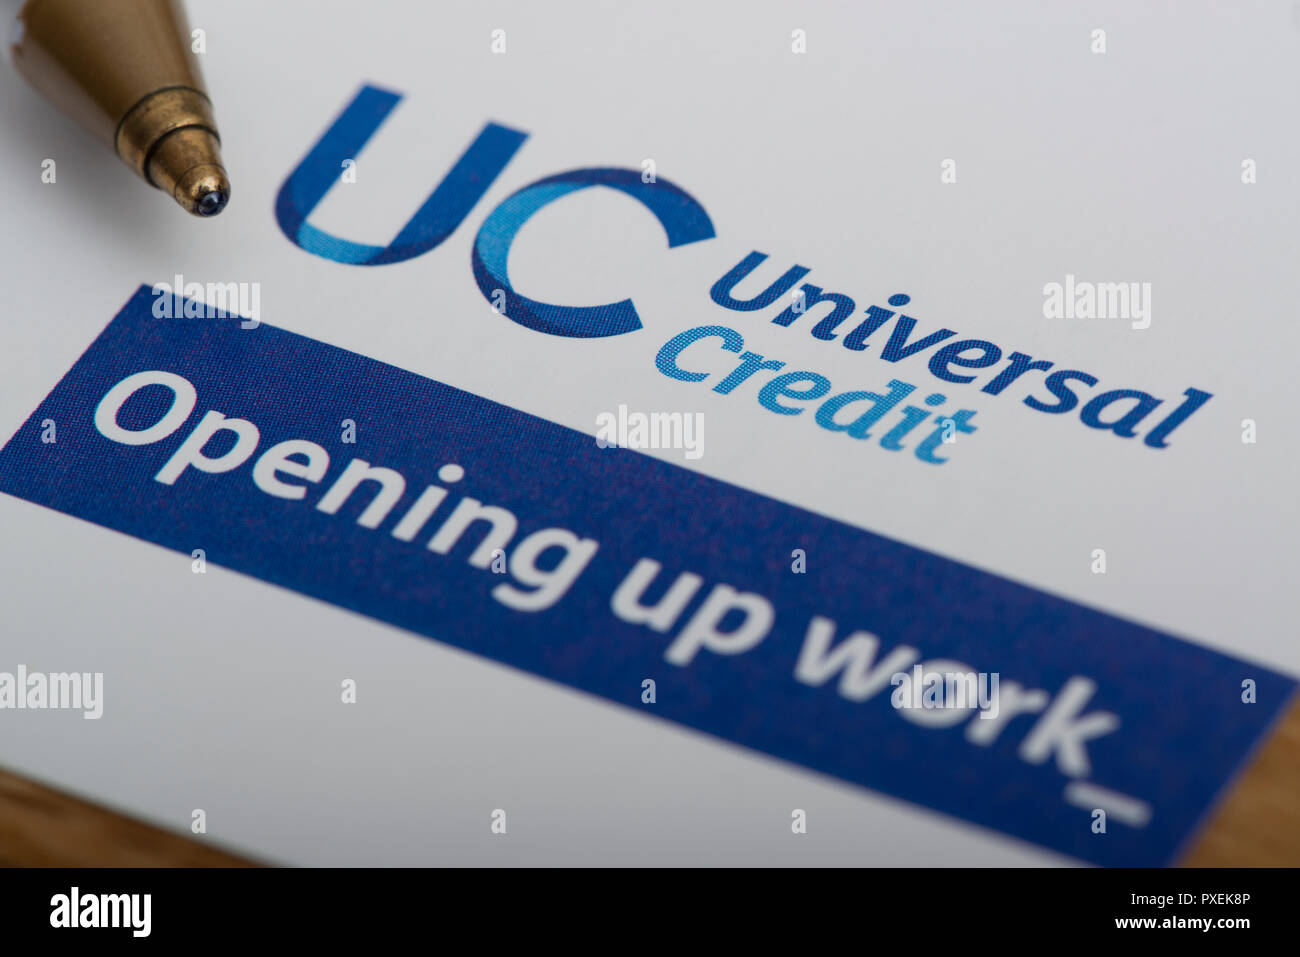 A piece of stationery featuring the Universal Credit logo, rests on a table along with a pen. Stock Photo